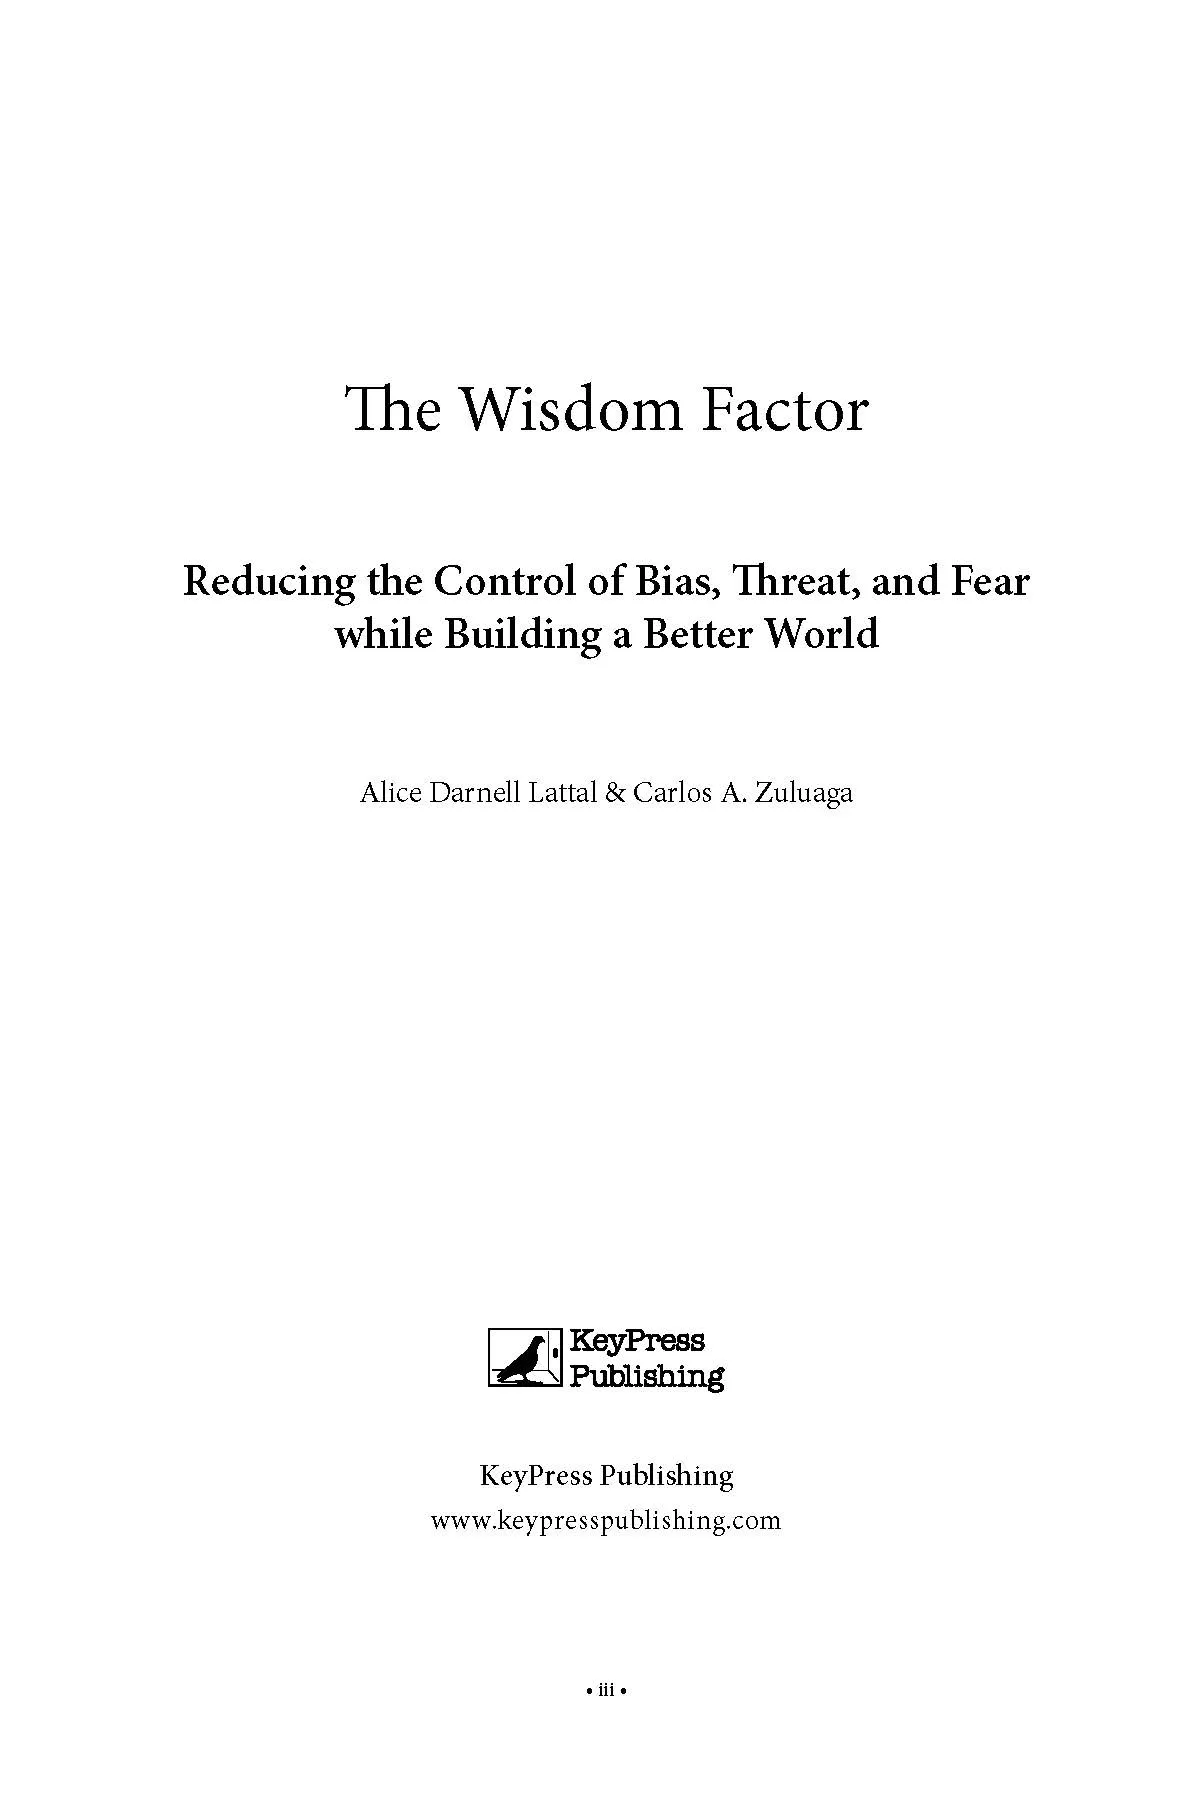 The Wisdom factor cover page